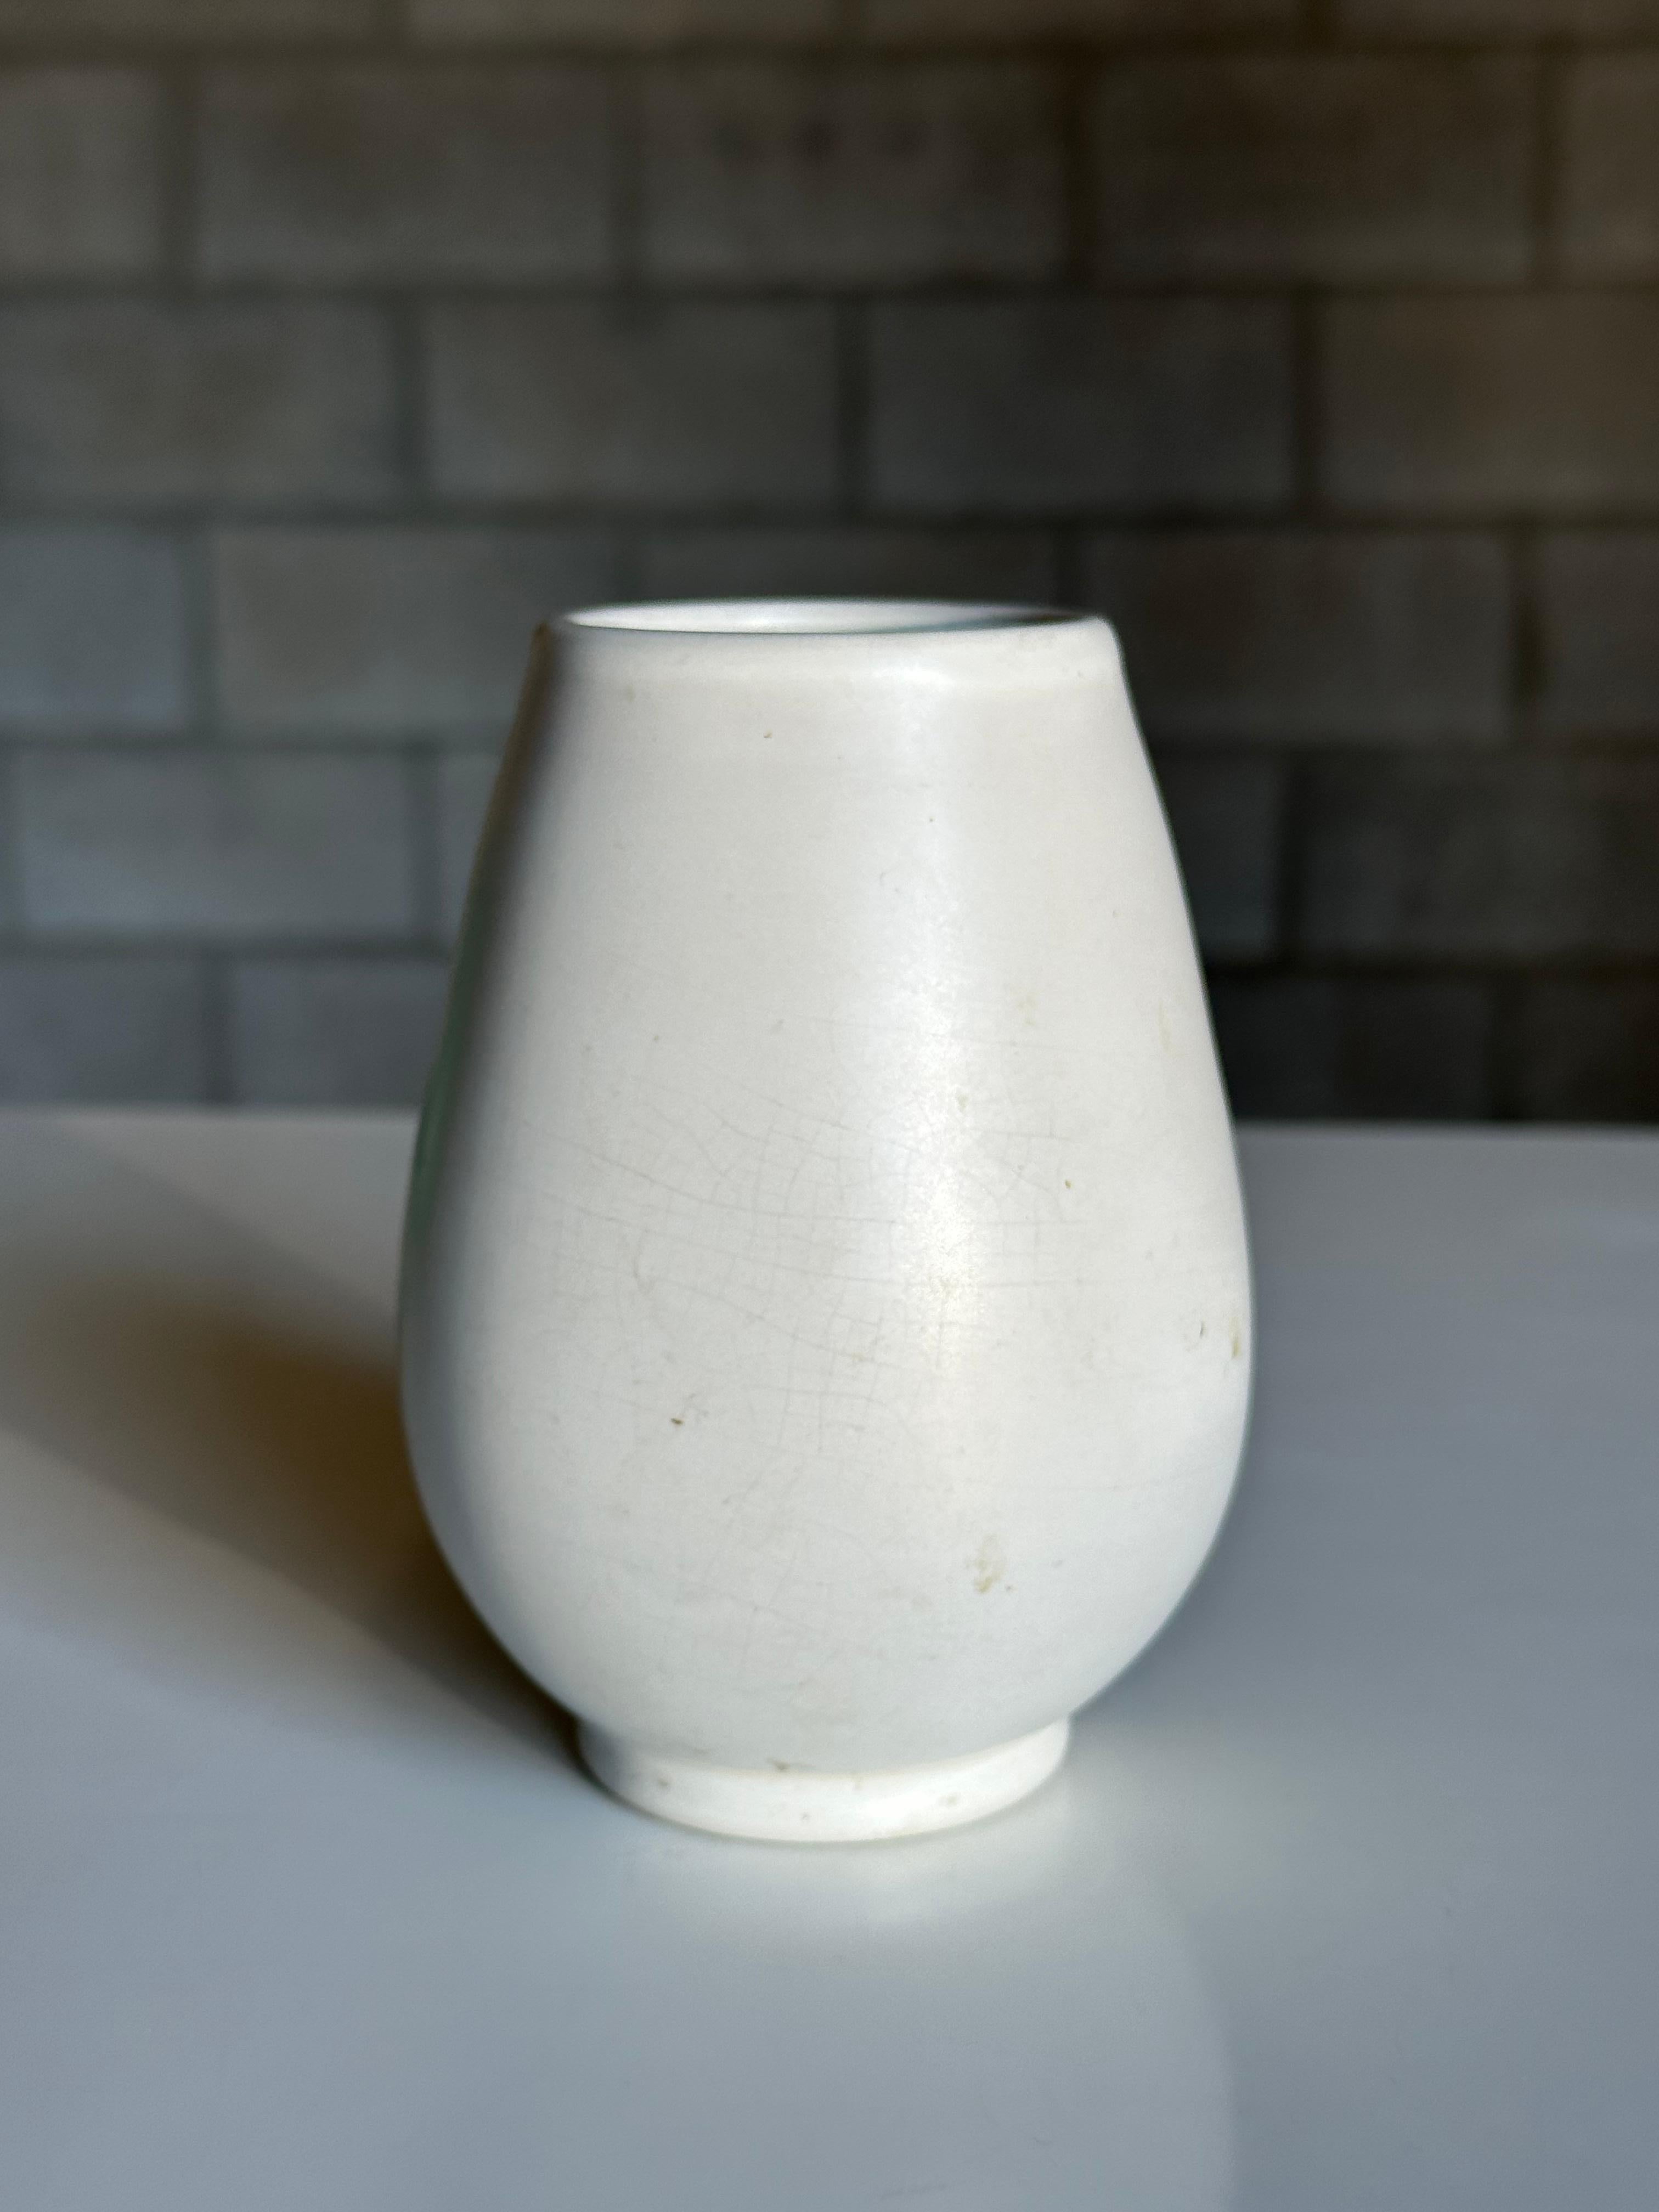 A wonderful vase produced by Nittsjö and attributed to Jerk Werkmäster. Great classic form vase with minimalist palette would allow for use in a variety of interior decors- minimalist, modern, contemporary, organic modern, Scandinavian, etc. 
